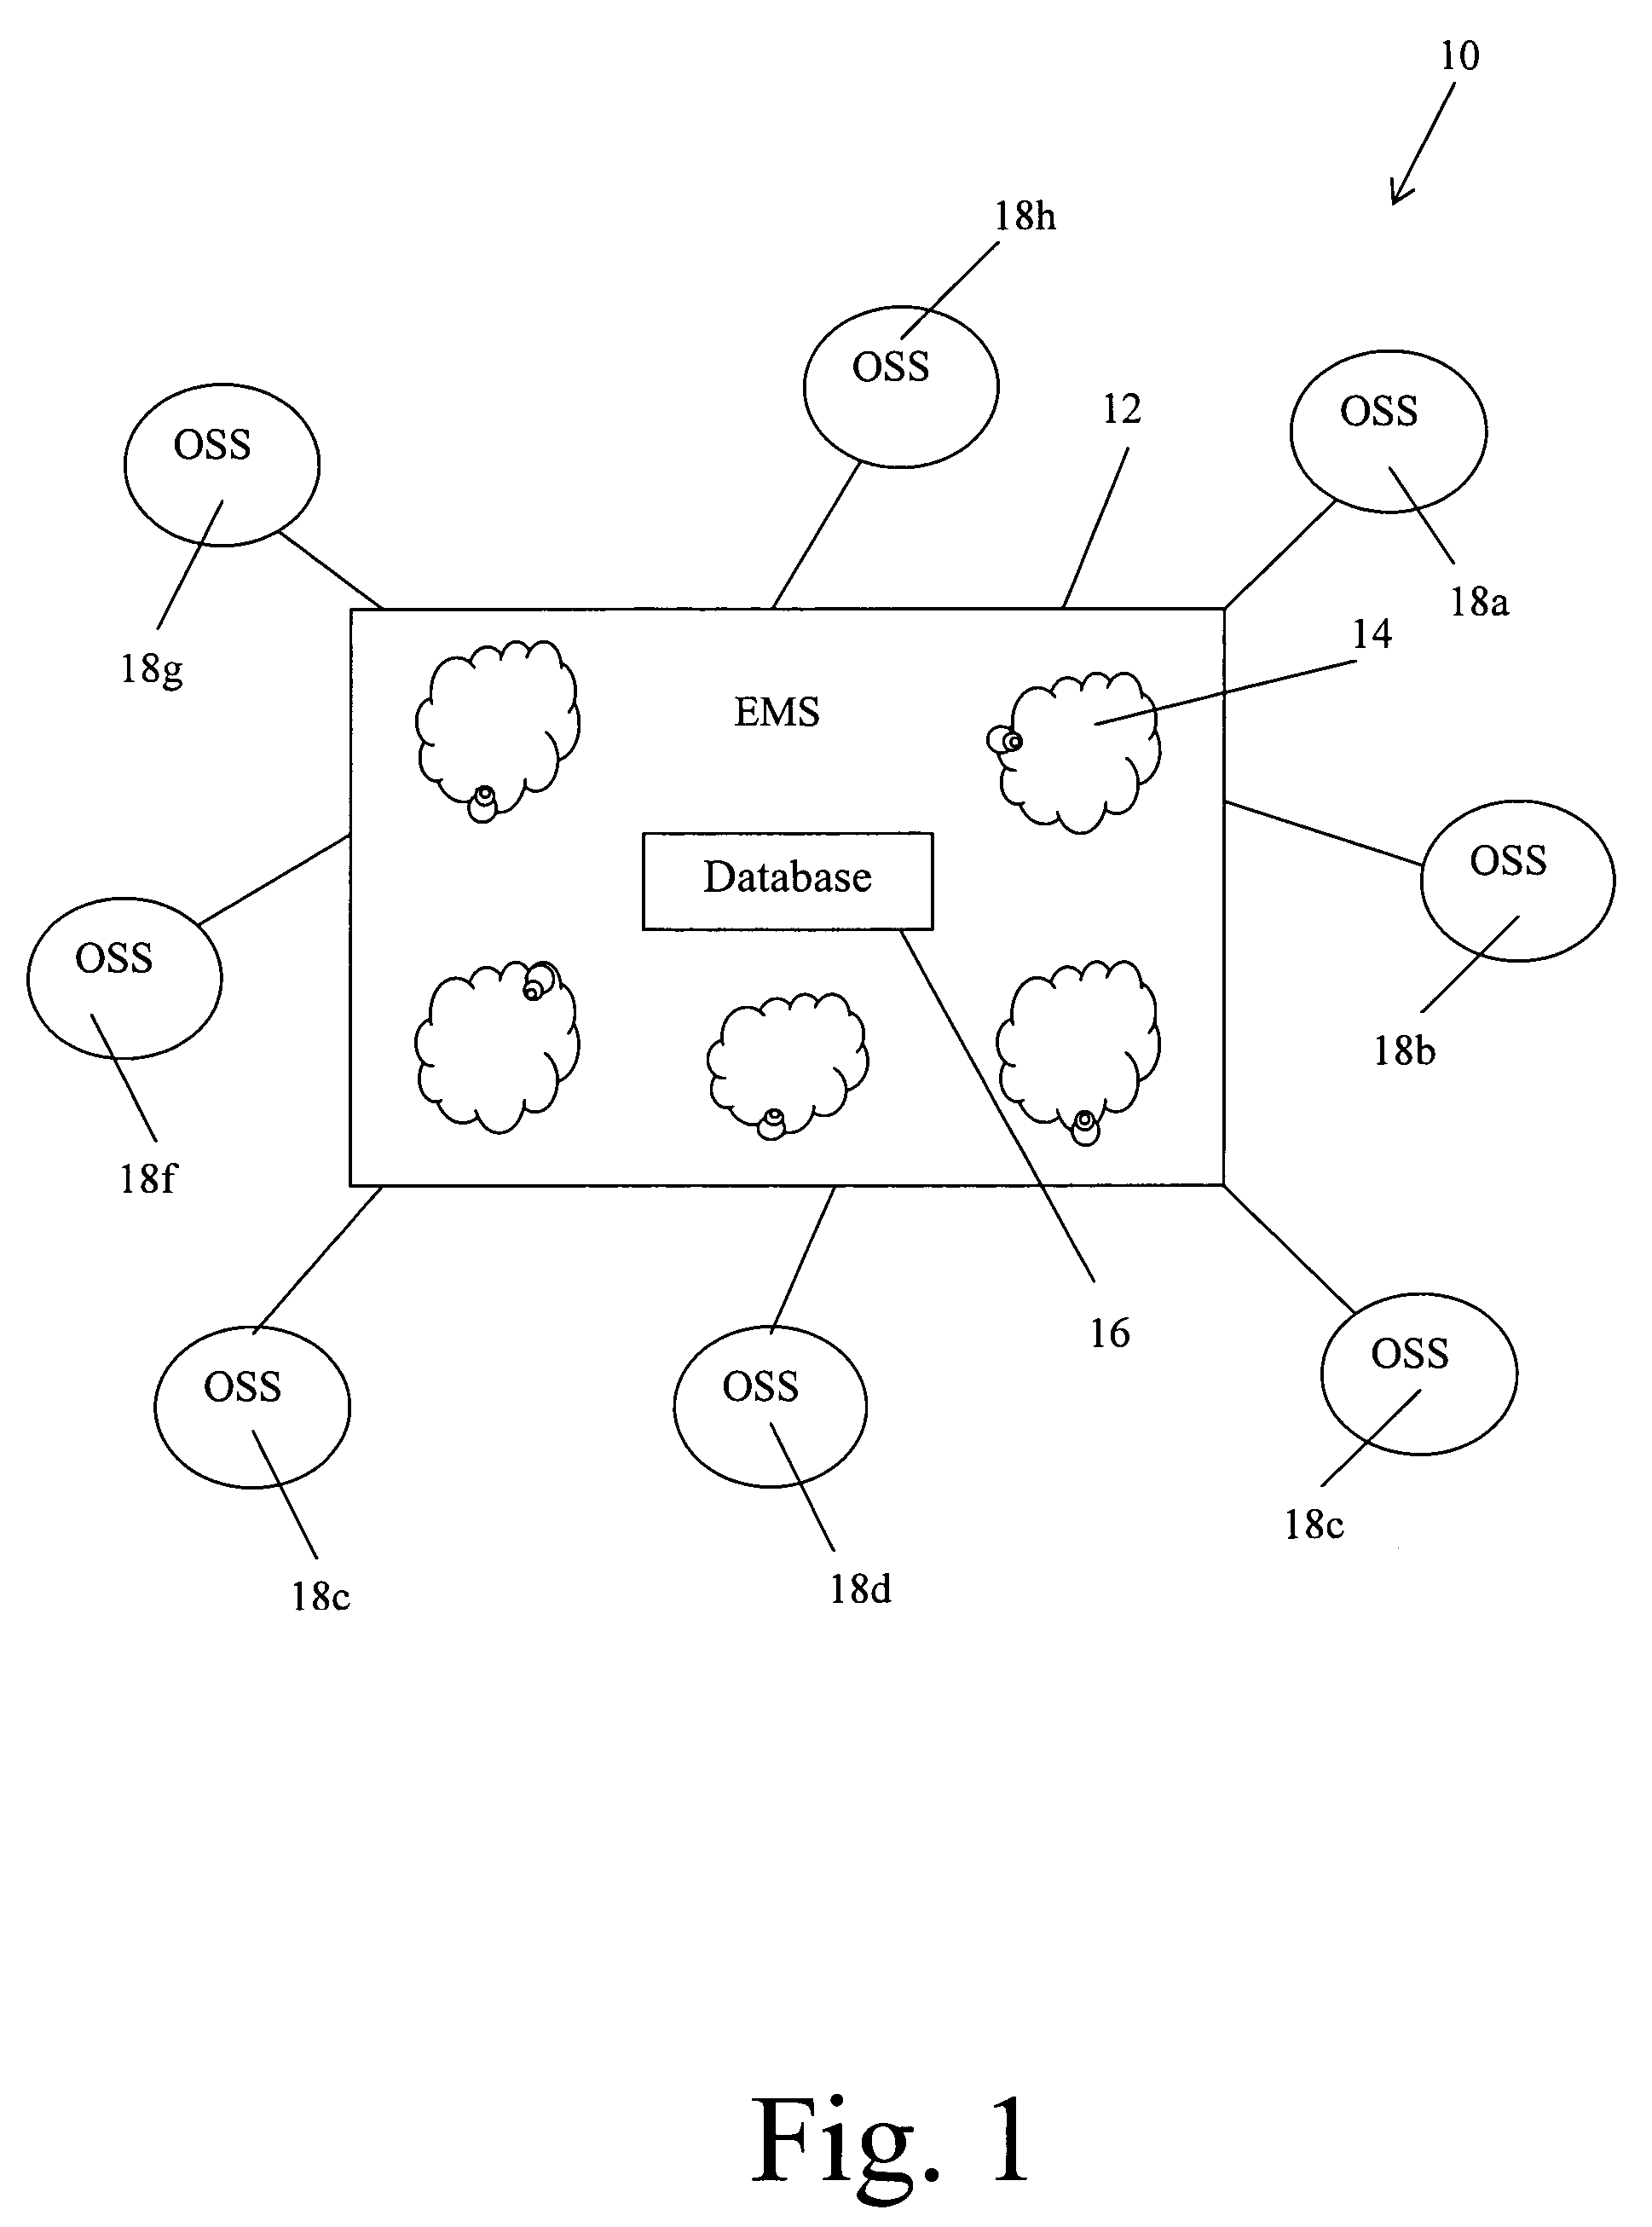 System and method for testing automated provisioning and maintenance of Operations Support Systems